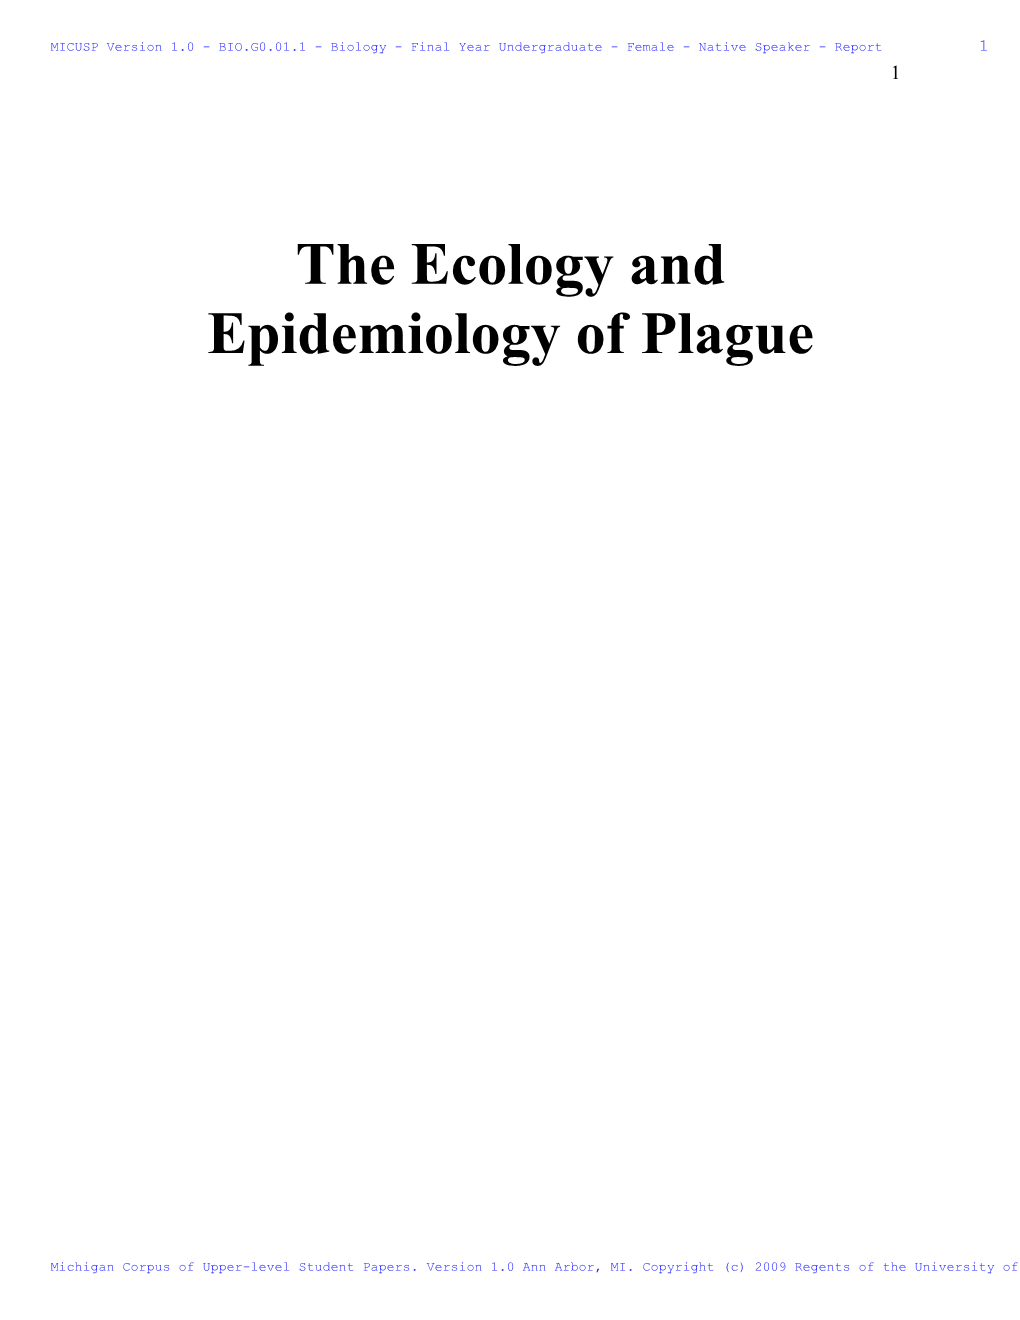 The Ecology and Epidemiology of Plague